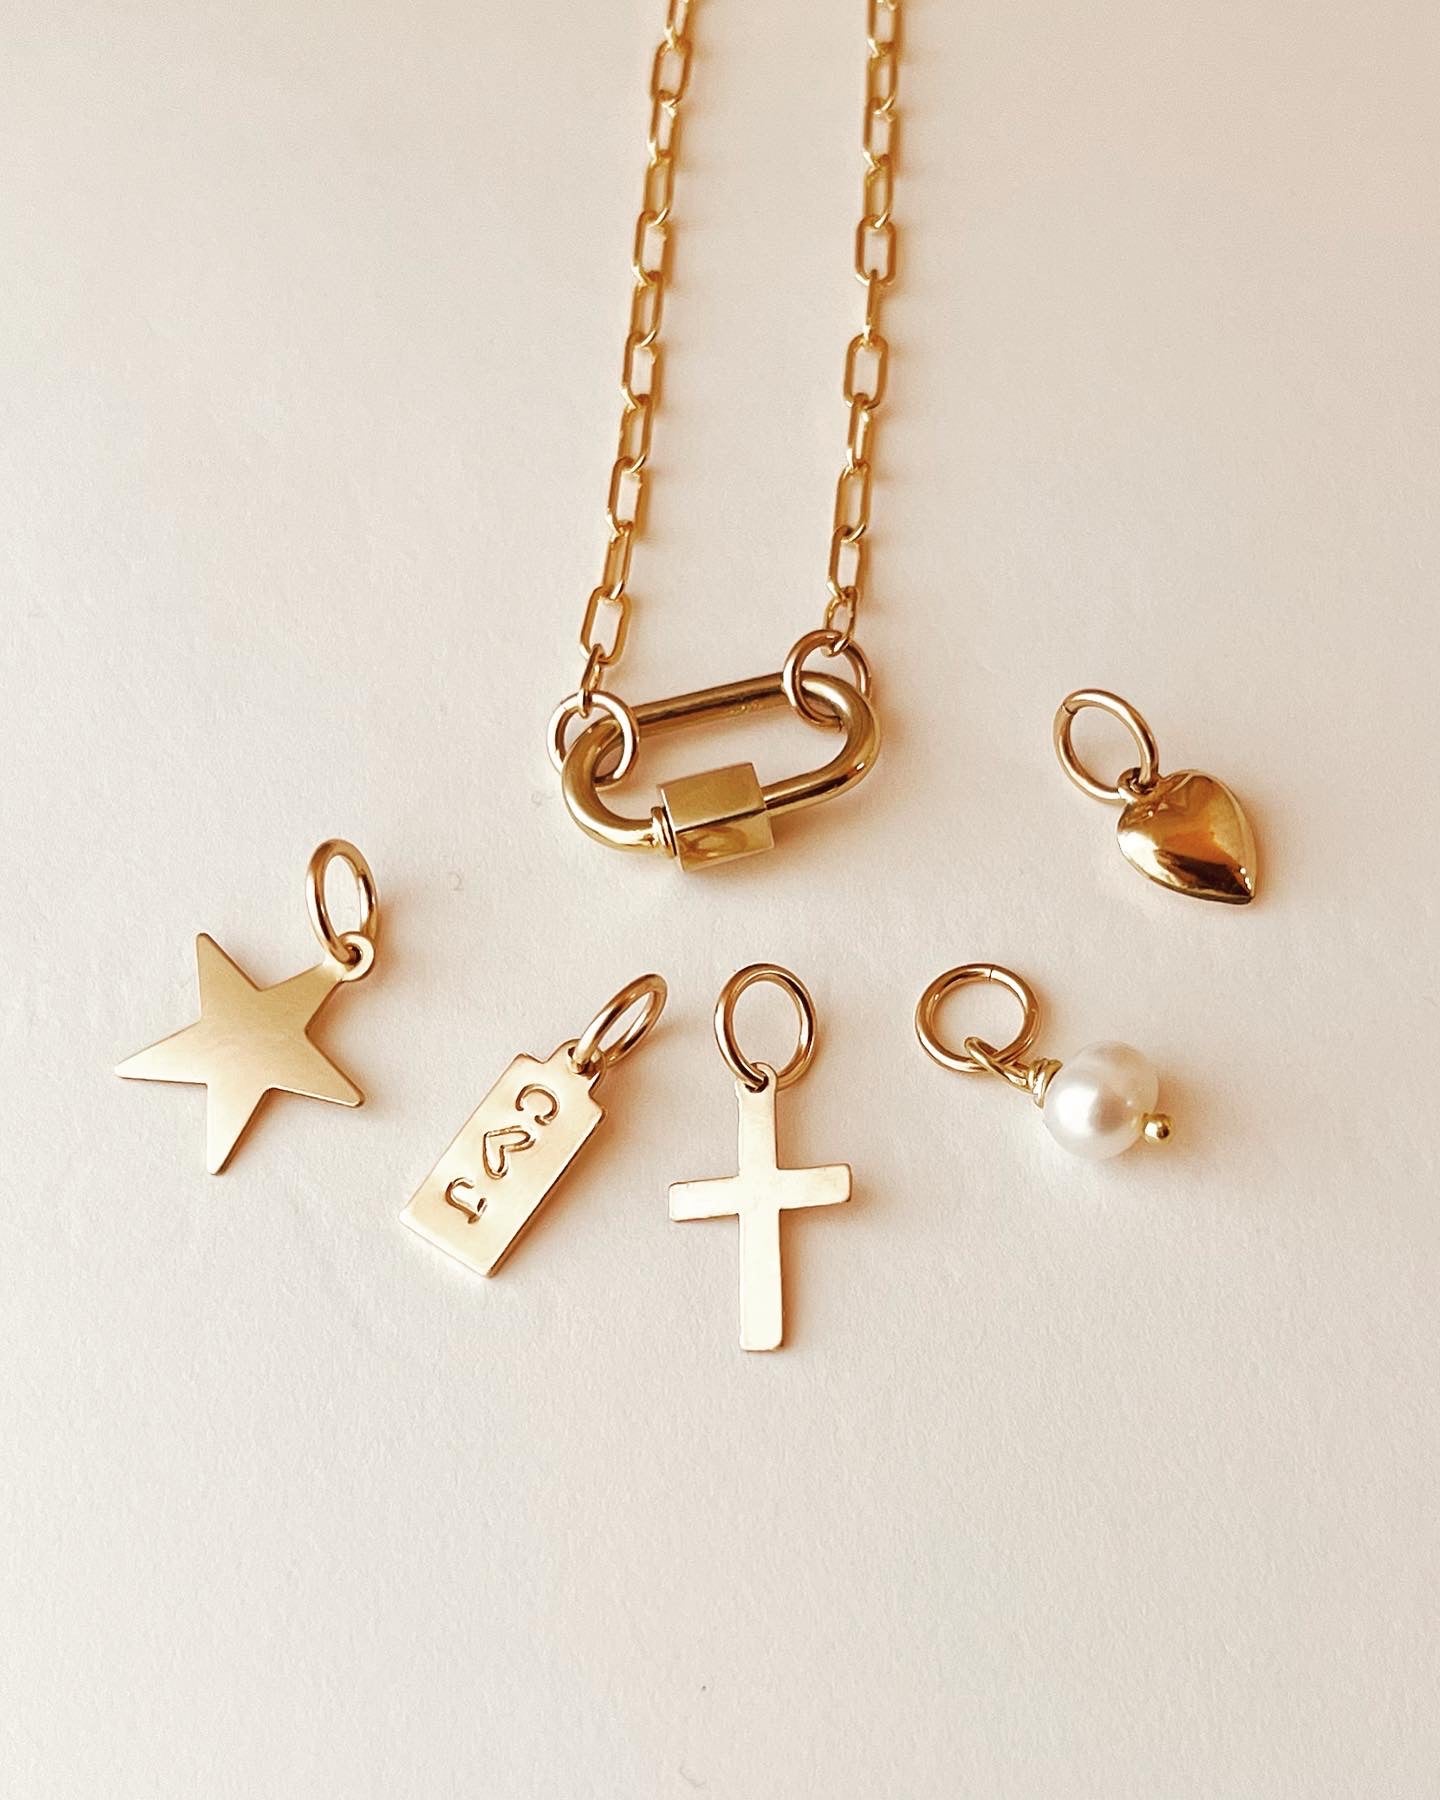 Charm Necklace, Personalized Necklace, Design Your Own Necklace